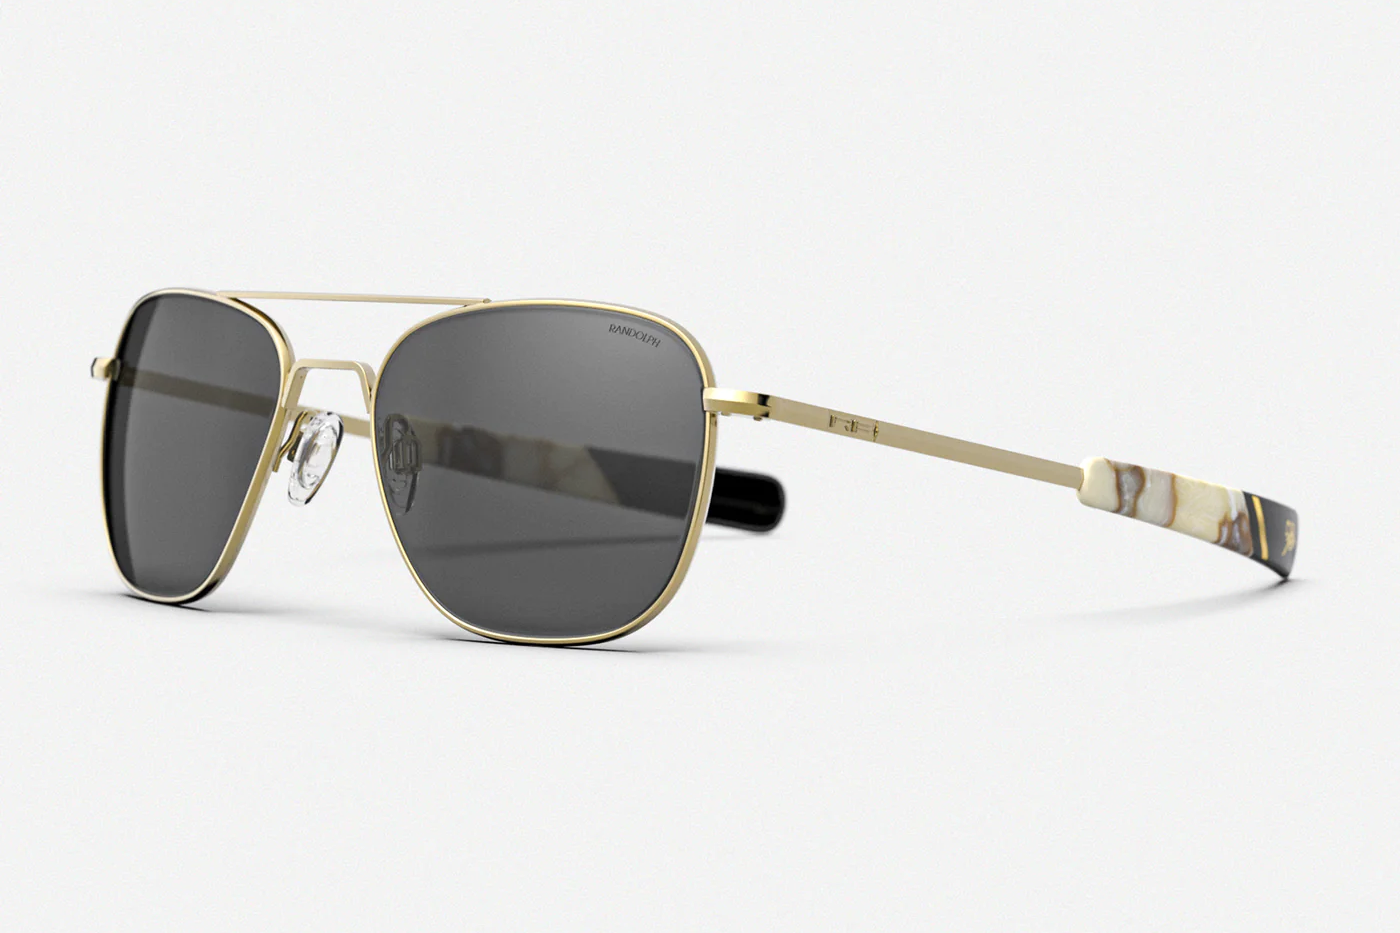 Gold aviator sunglasses with tinted glass